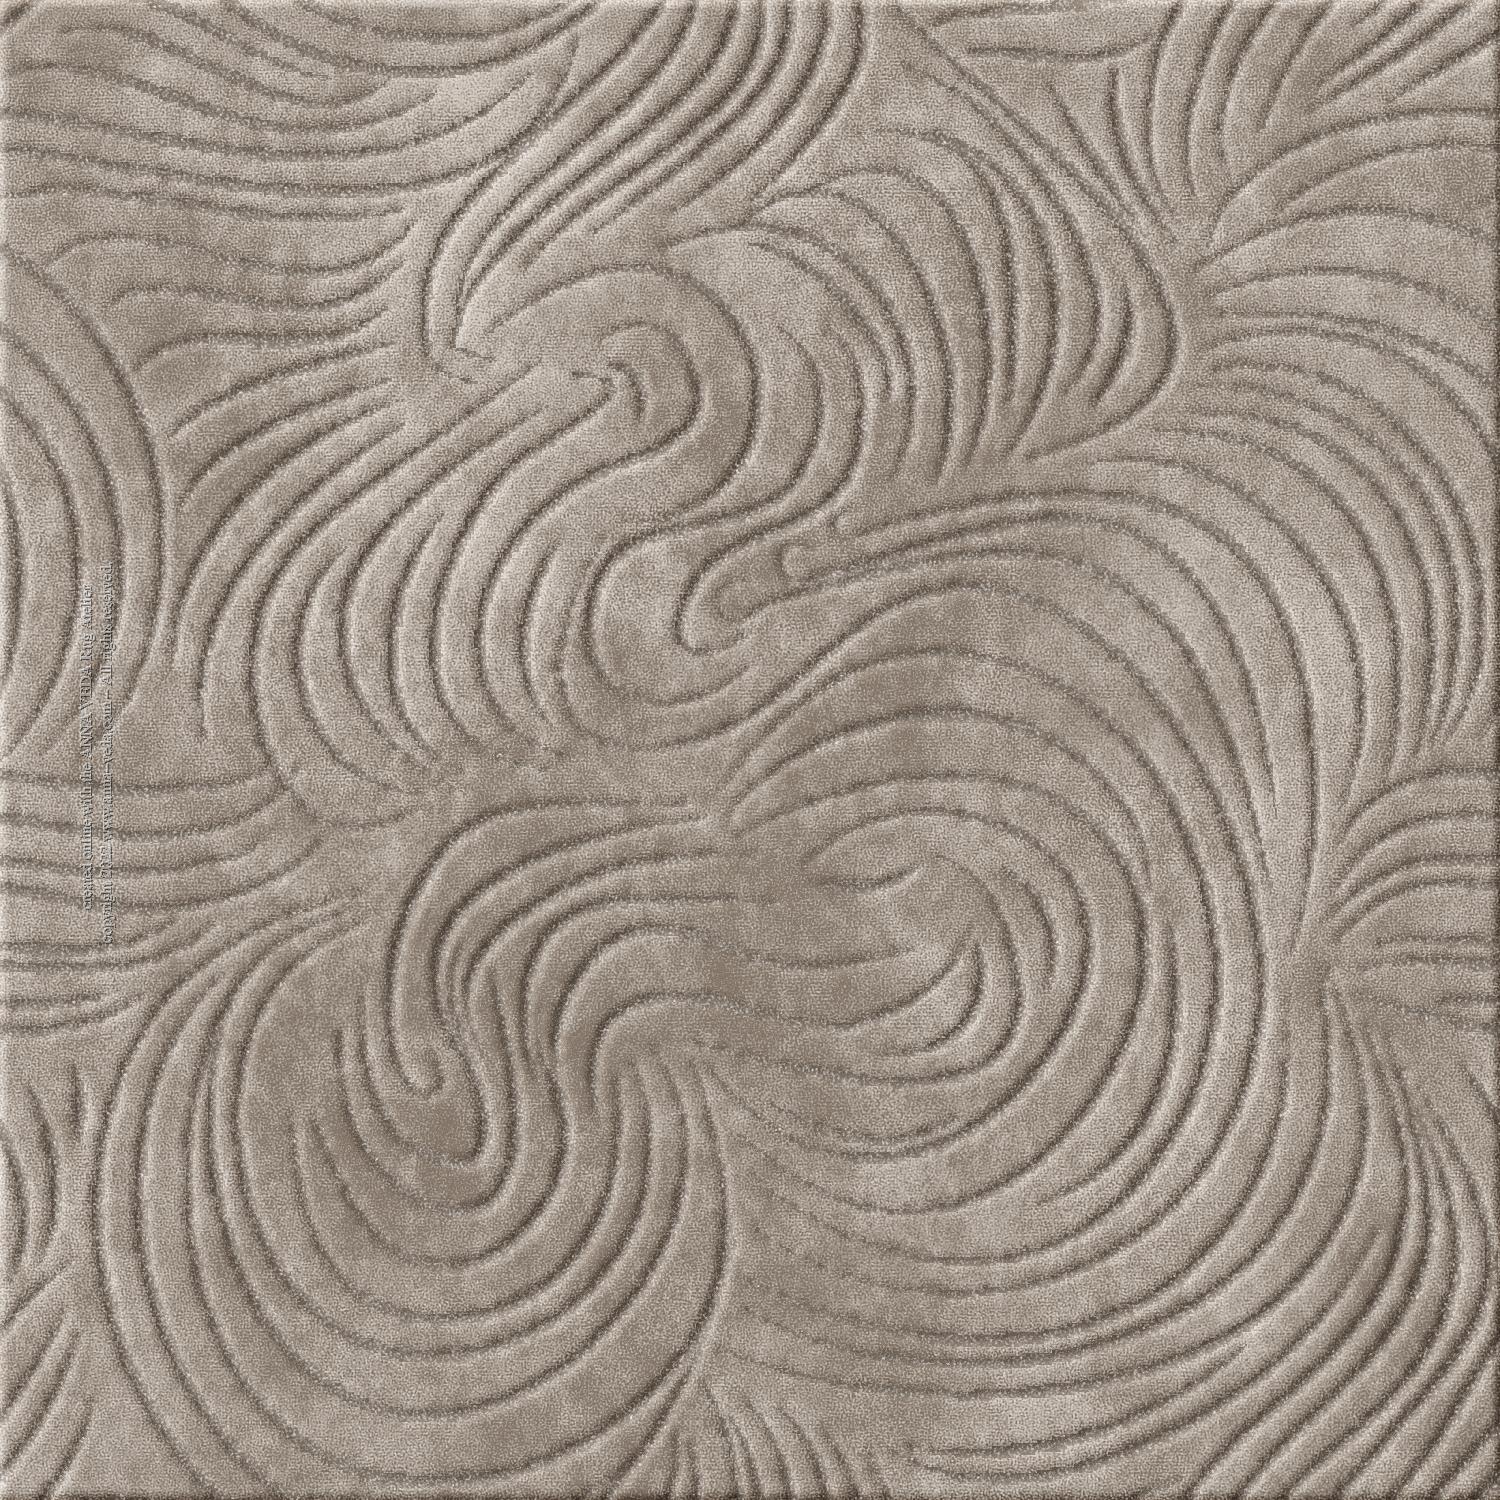 inspire 6561-springs - handmade rug, woven knot (India), 25x35 3ply quality